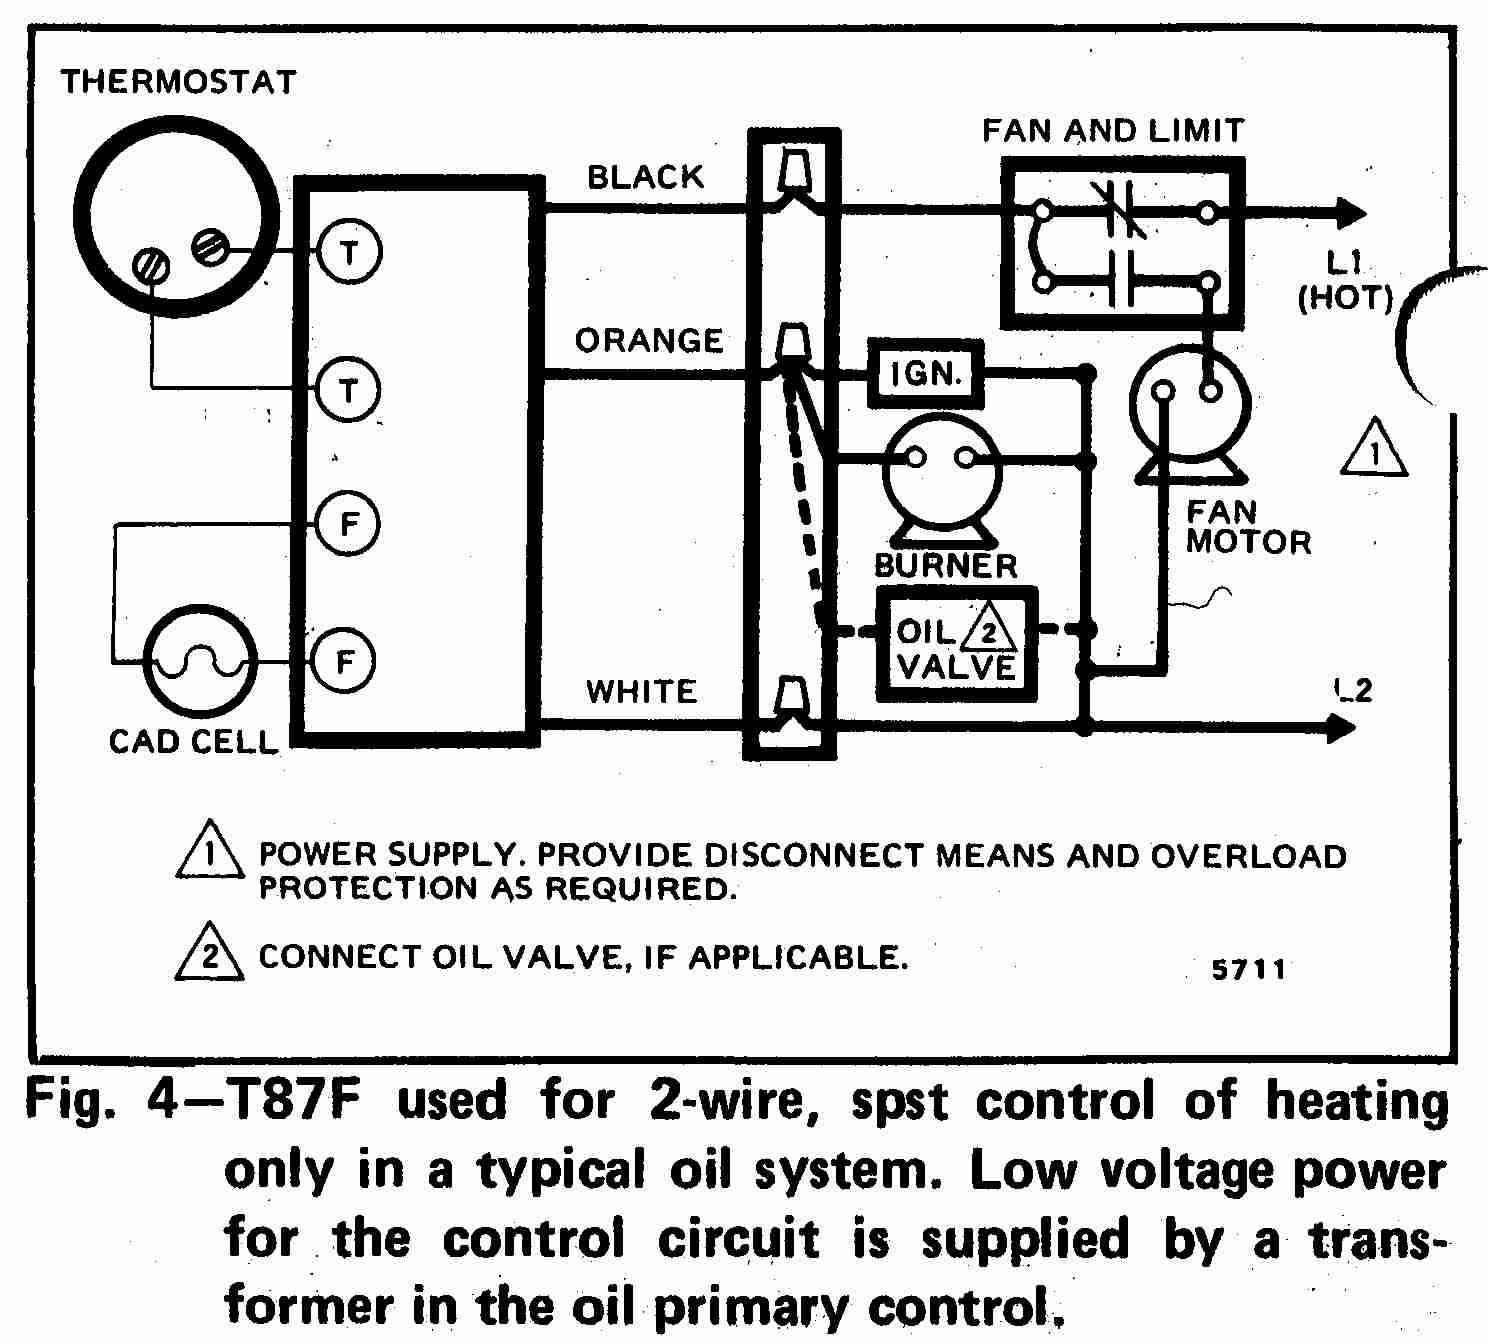 Hvac System Diagram Room Thermostat Wiring Diagrams For Hvac Systems